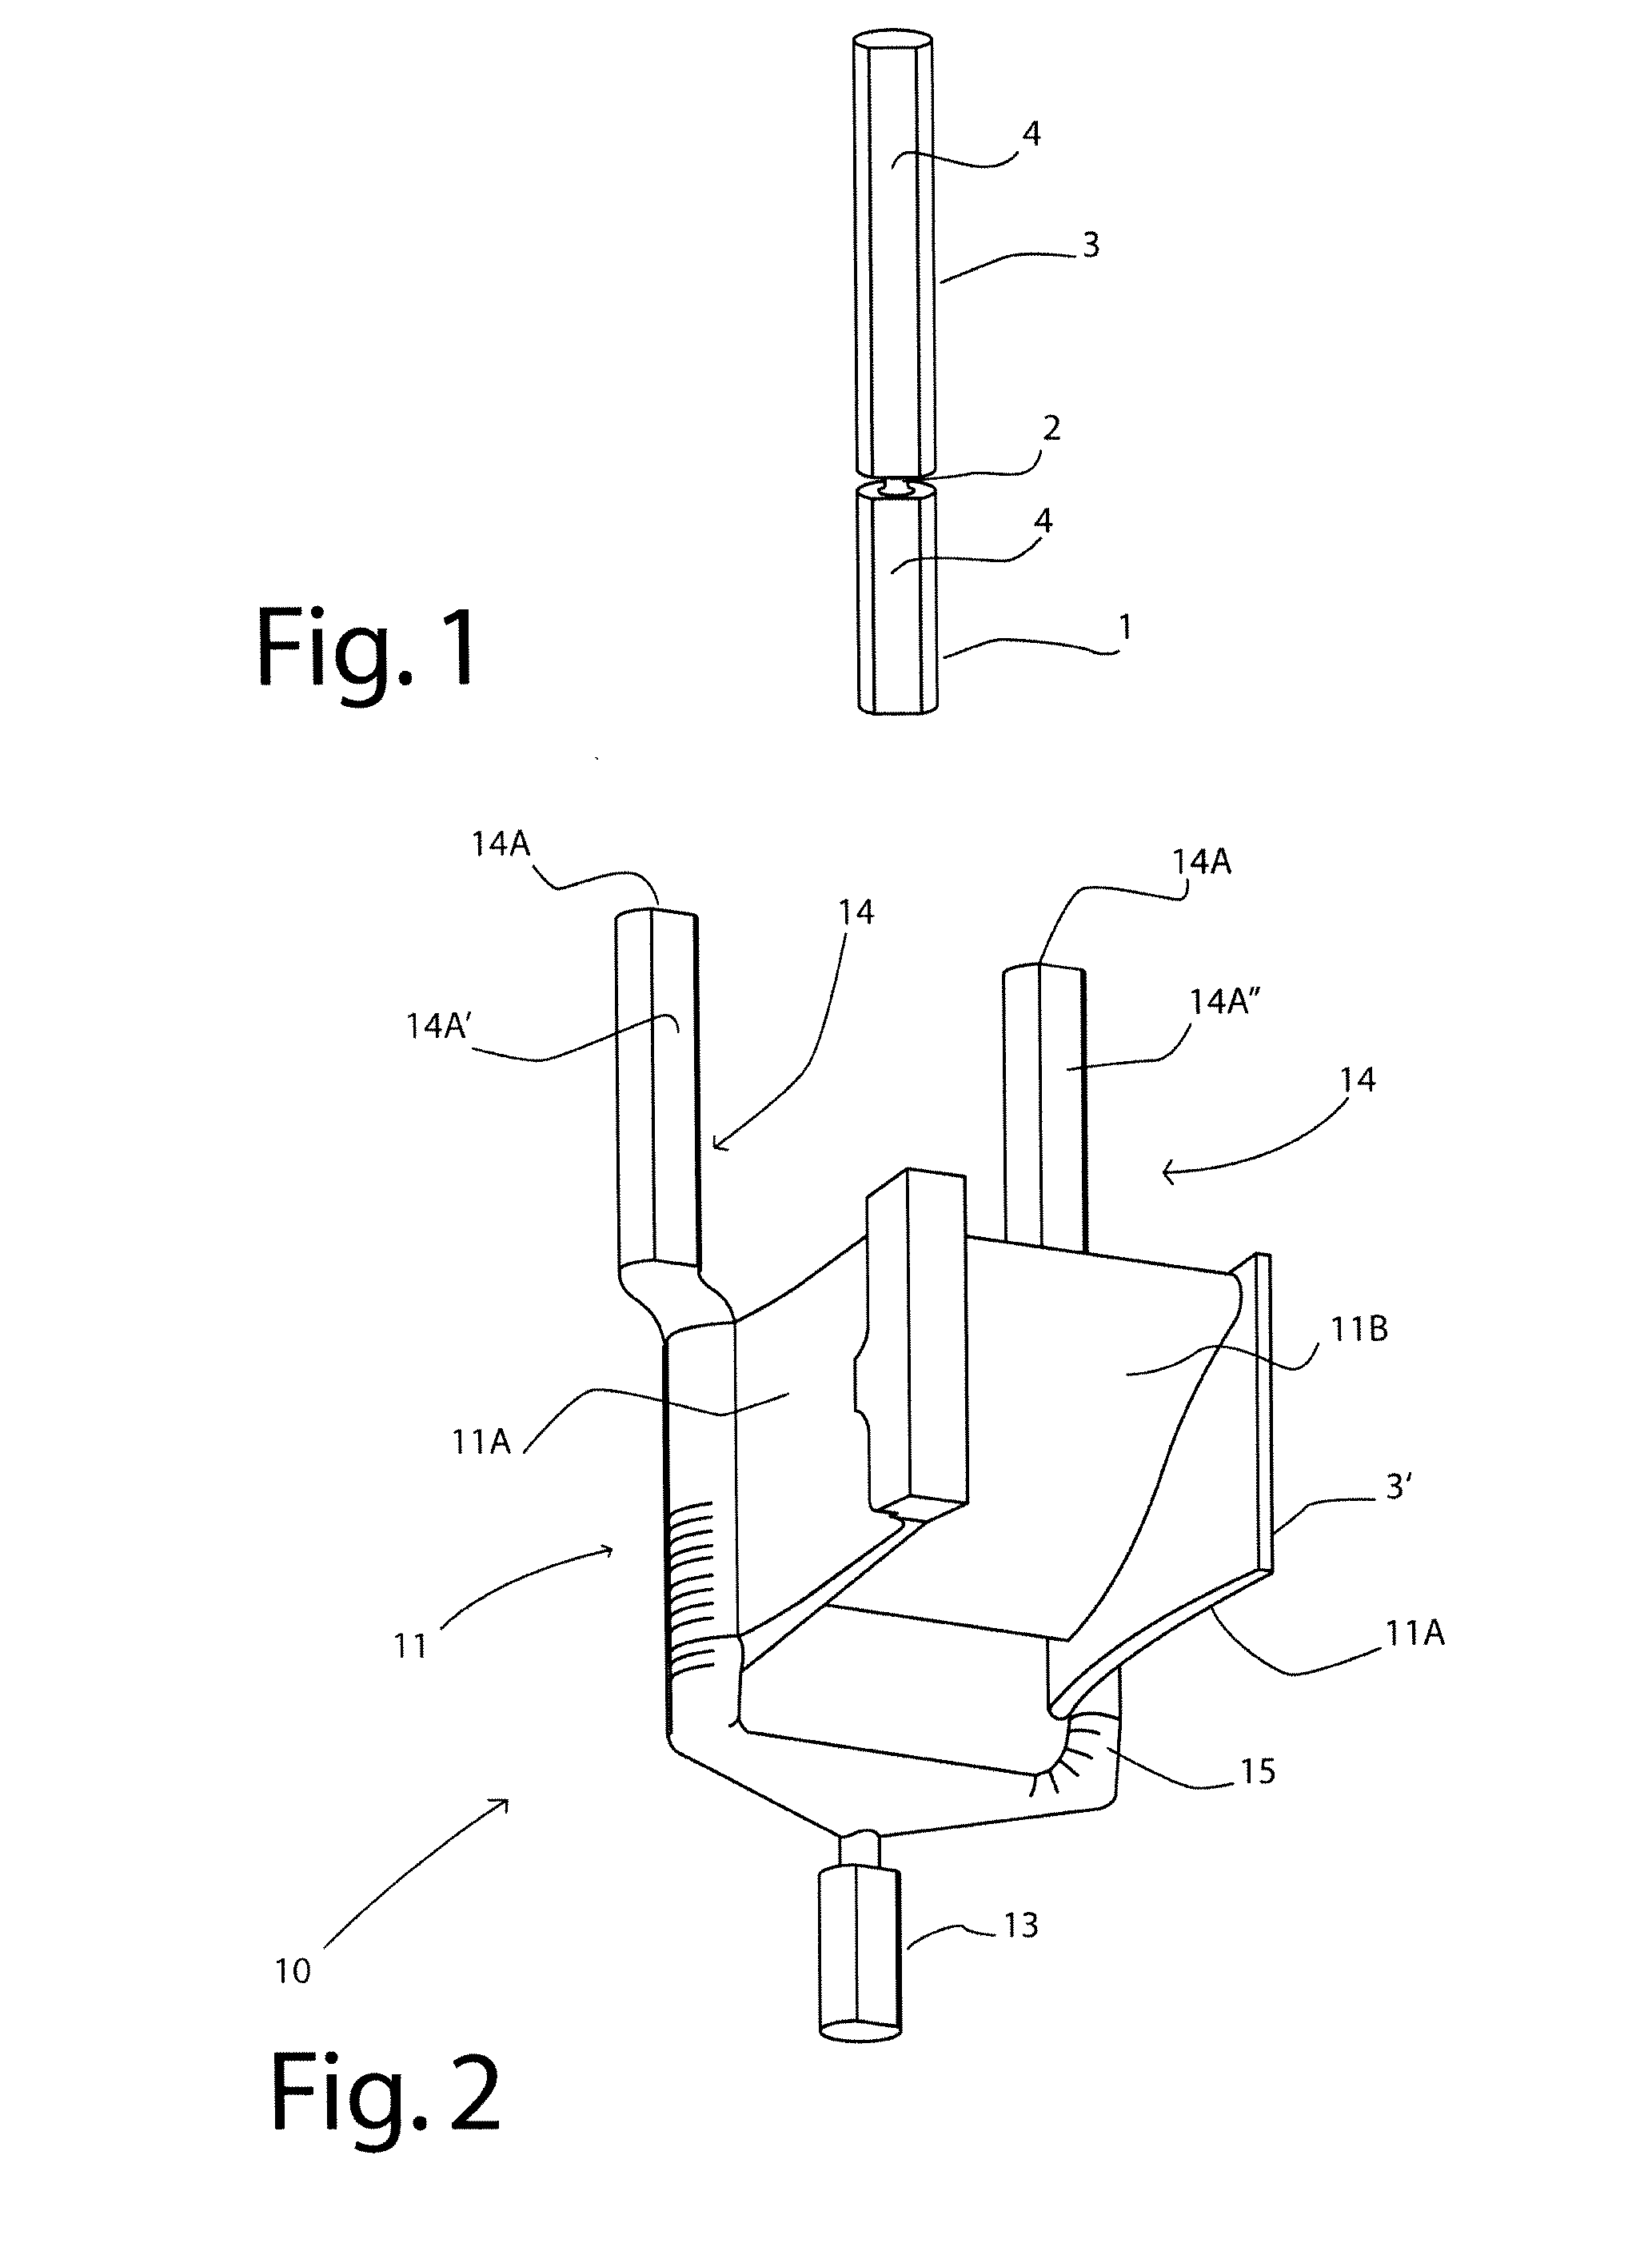 Process for manufacturing single-crystal seeds simultaneously with the casting of single-crystal parts